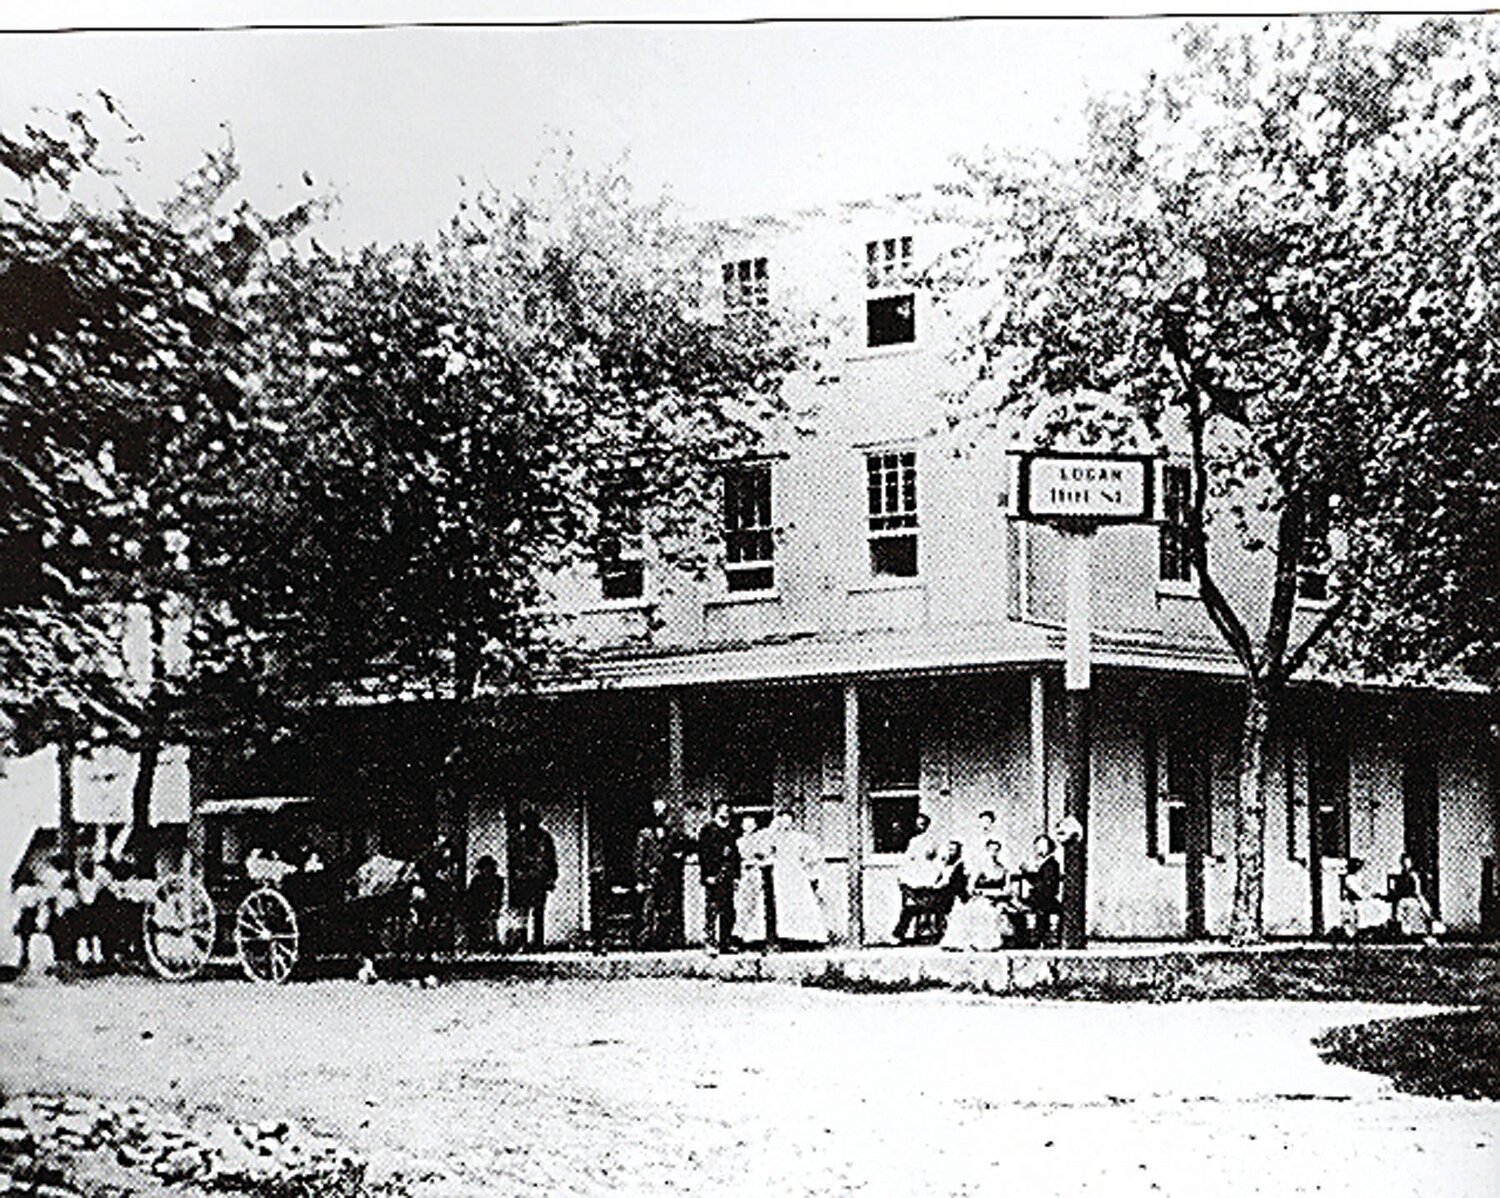 This photo shows the Logan House in the early 19th century. John Wells, a Philadelphia carpenter, shrewdly obtained a license to operate the New Hope tavern, which became the Logan Inn, likely a key move in the eventual rerouting of Old York Road to pass through New Hope instead of Reading’s Landing a few miles north.